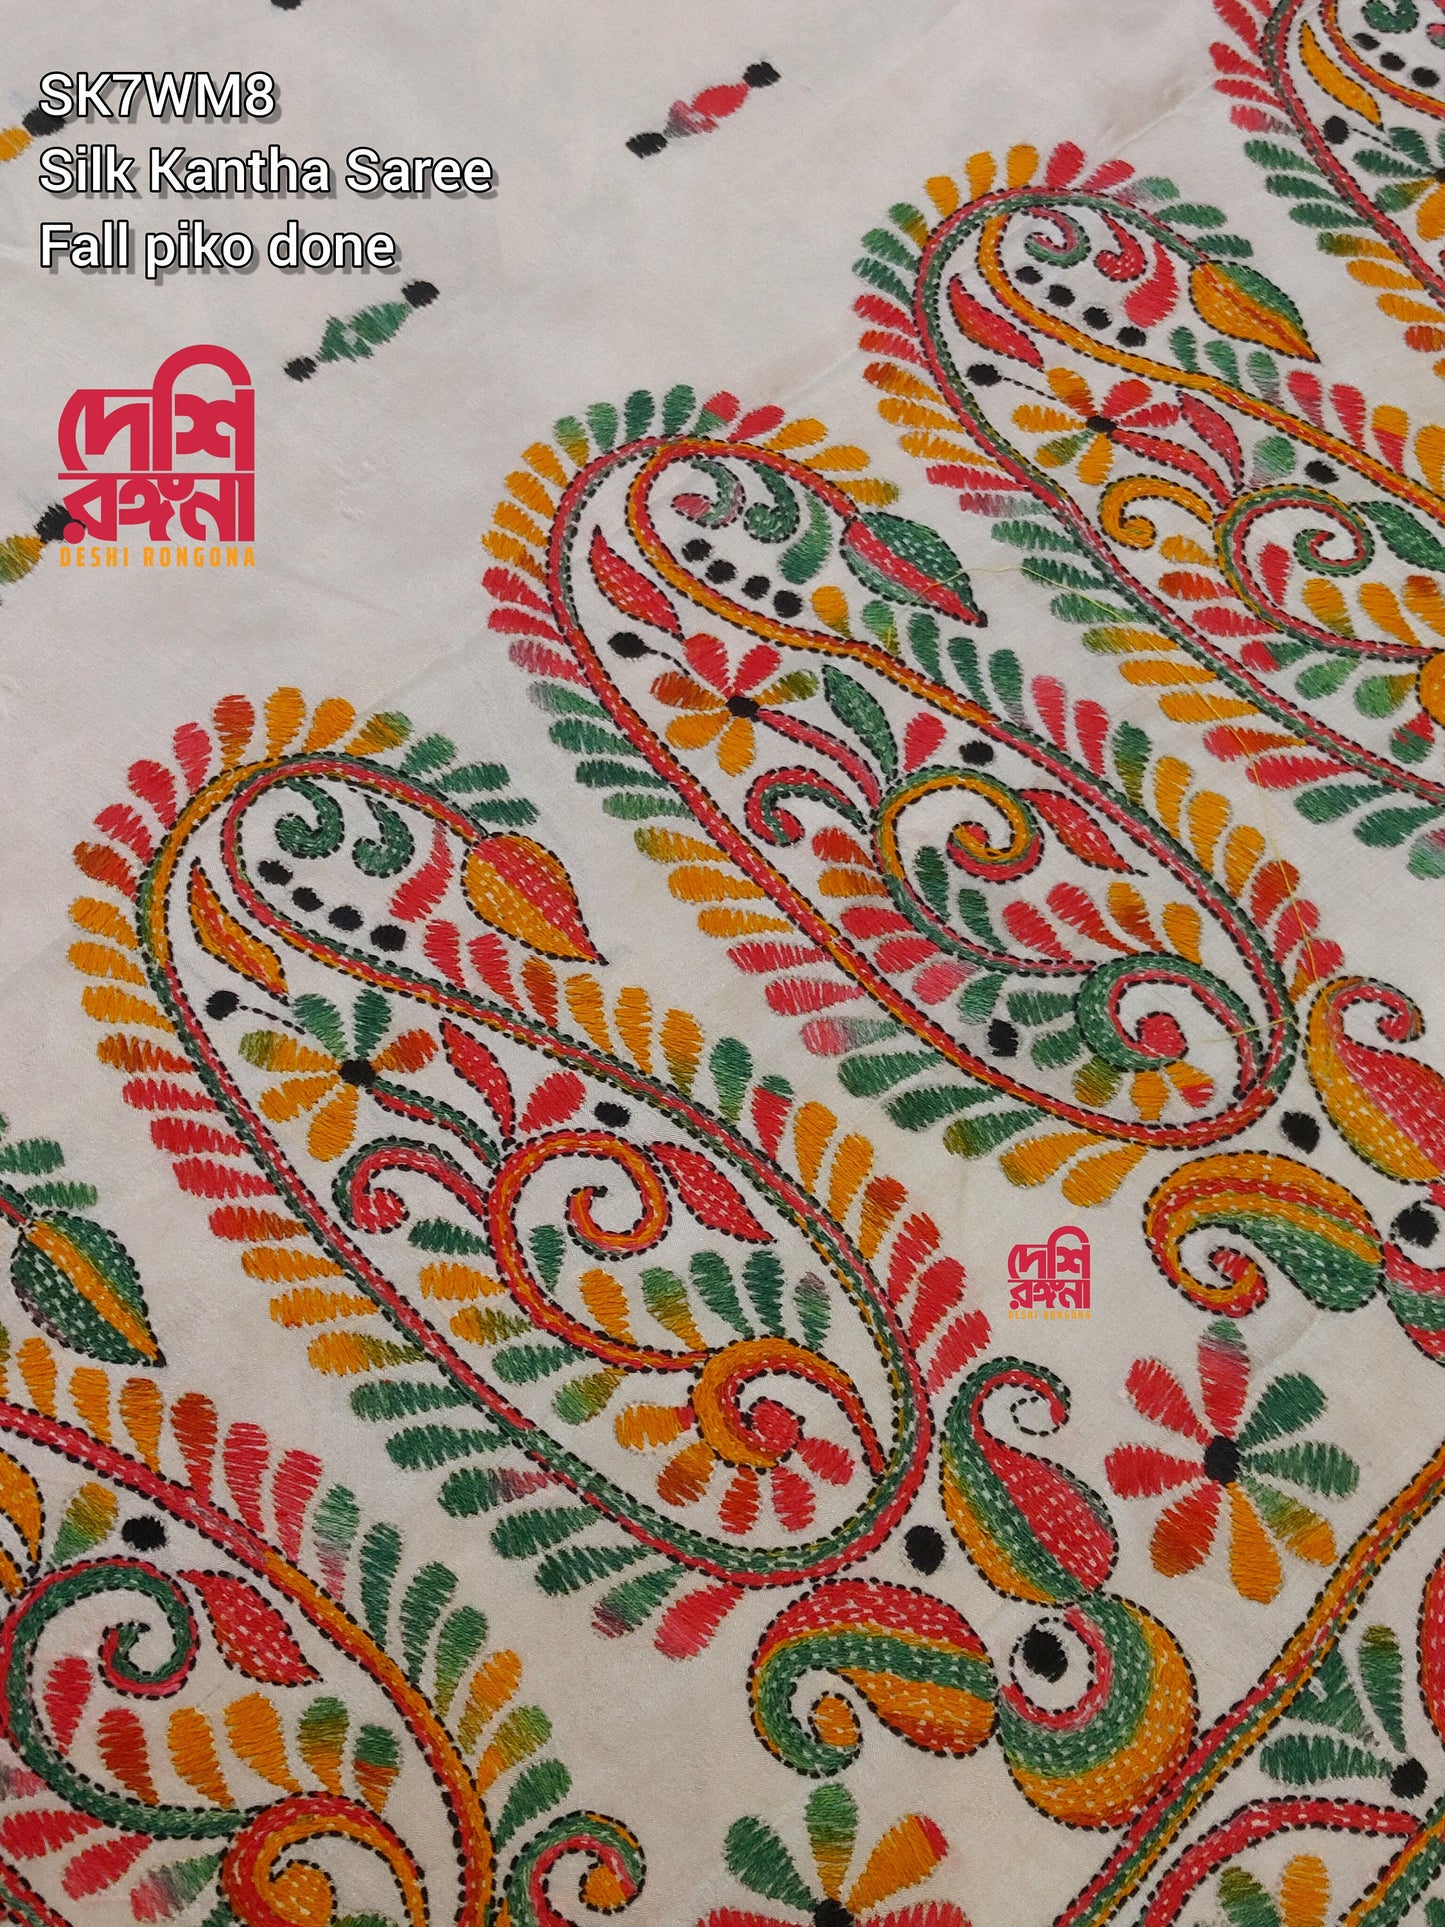 Extraordinary Hand Stiched Kantha Saree, Off White Pure Bangalore Silk, Red/Orange Green Works allover, Fall/piko done, Elegant and Classy